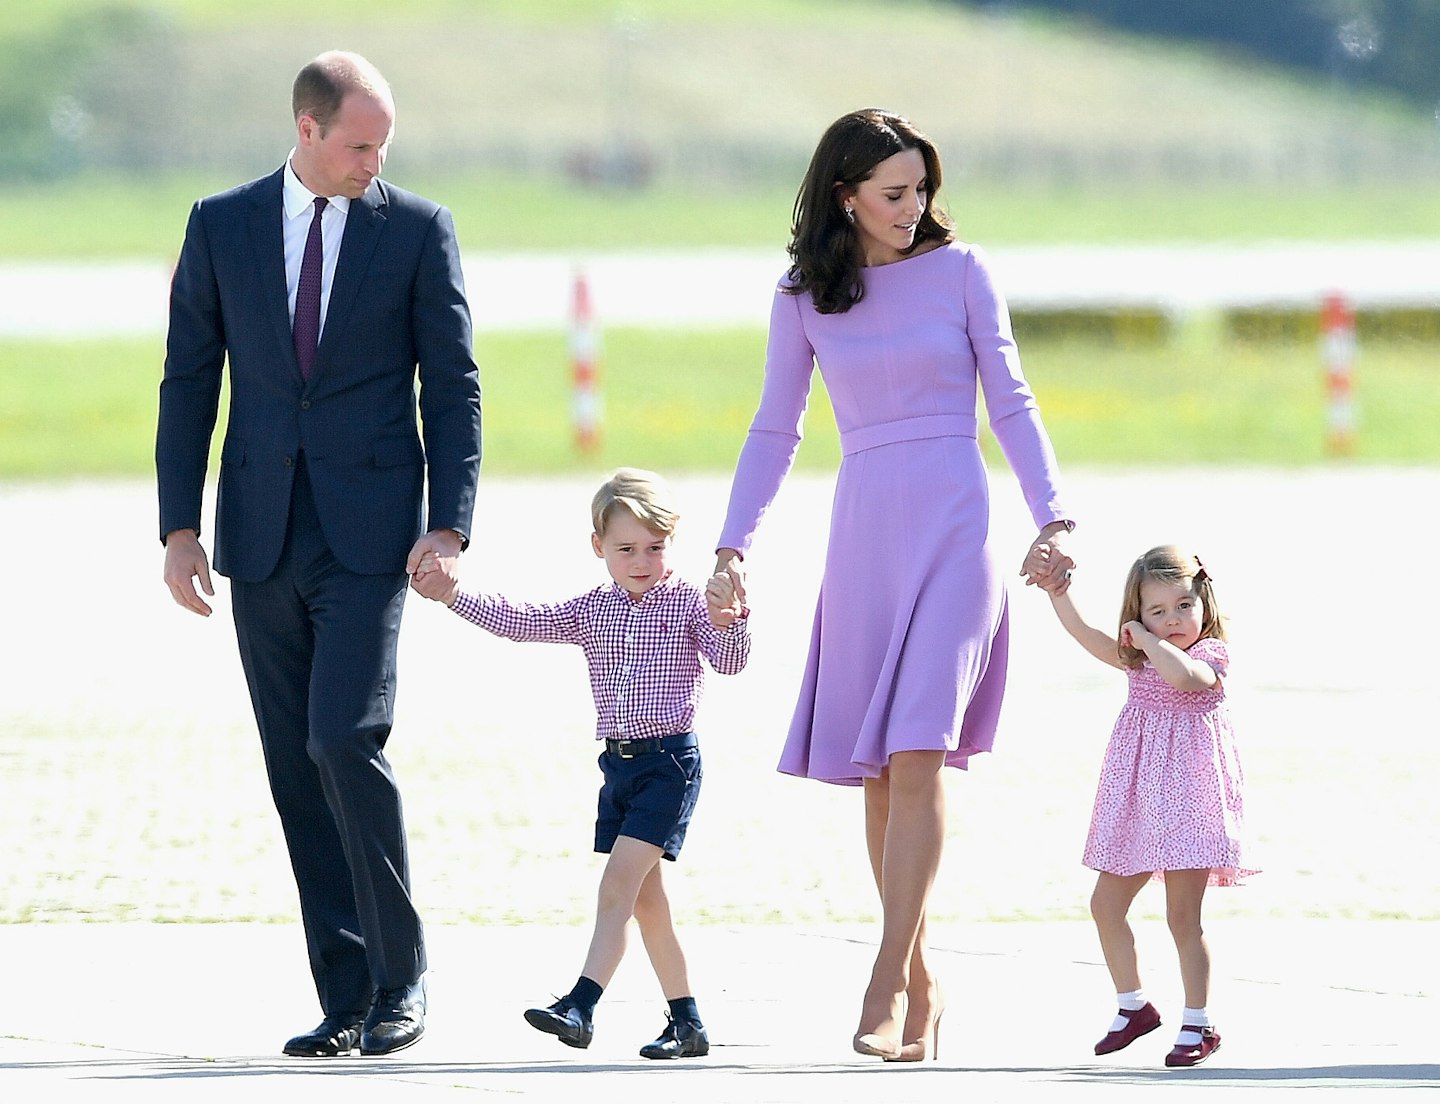 The final day of the royal tour